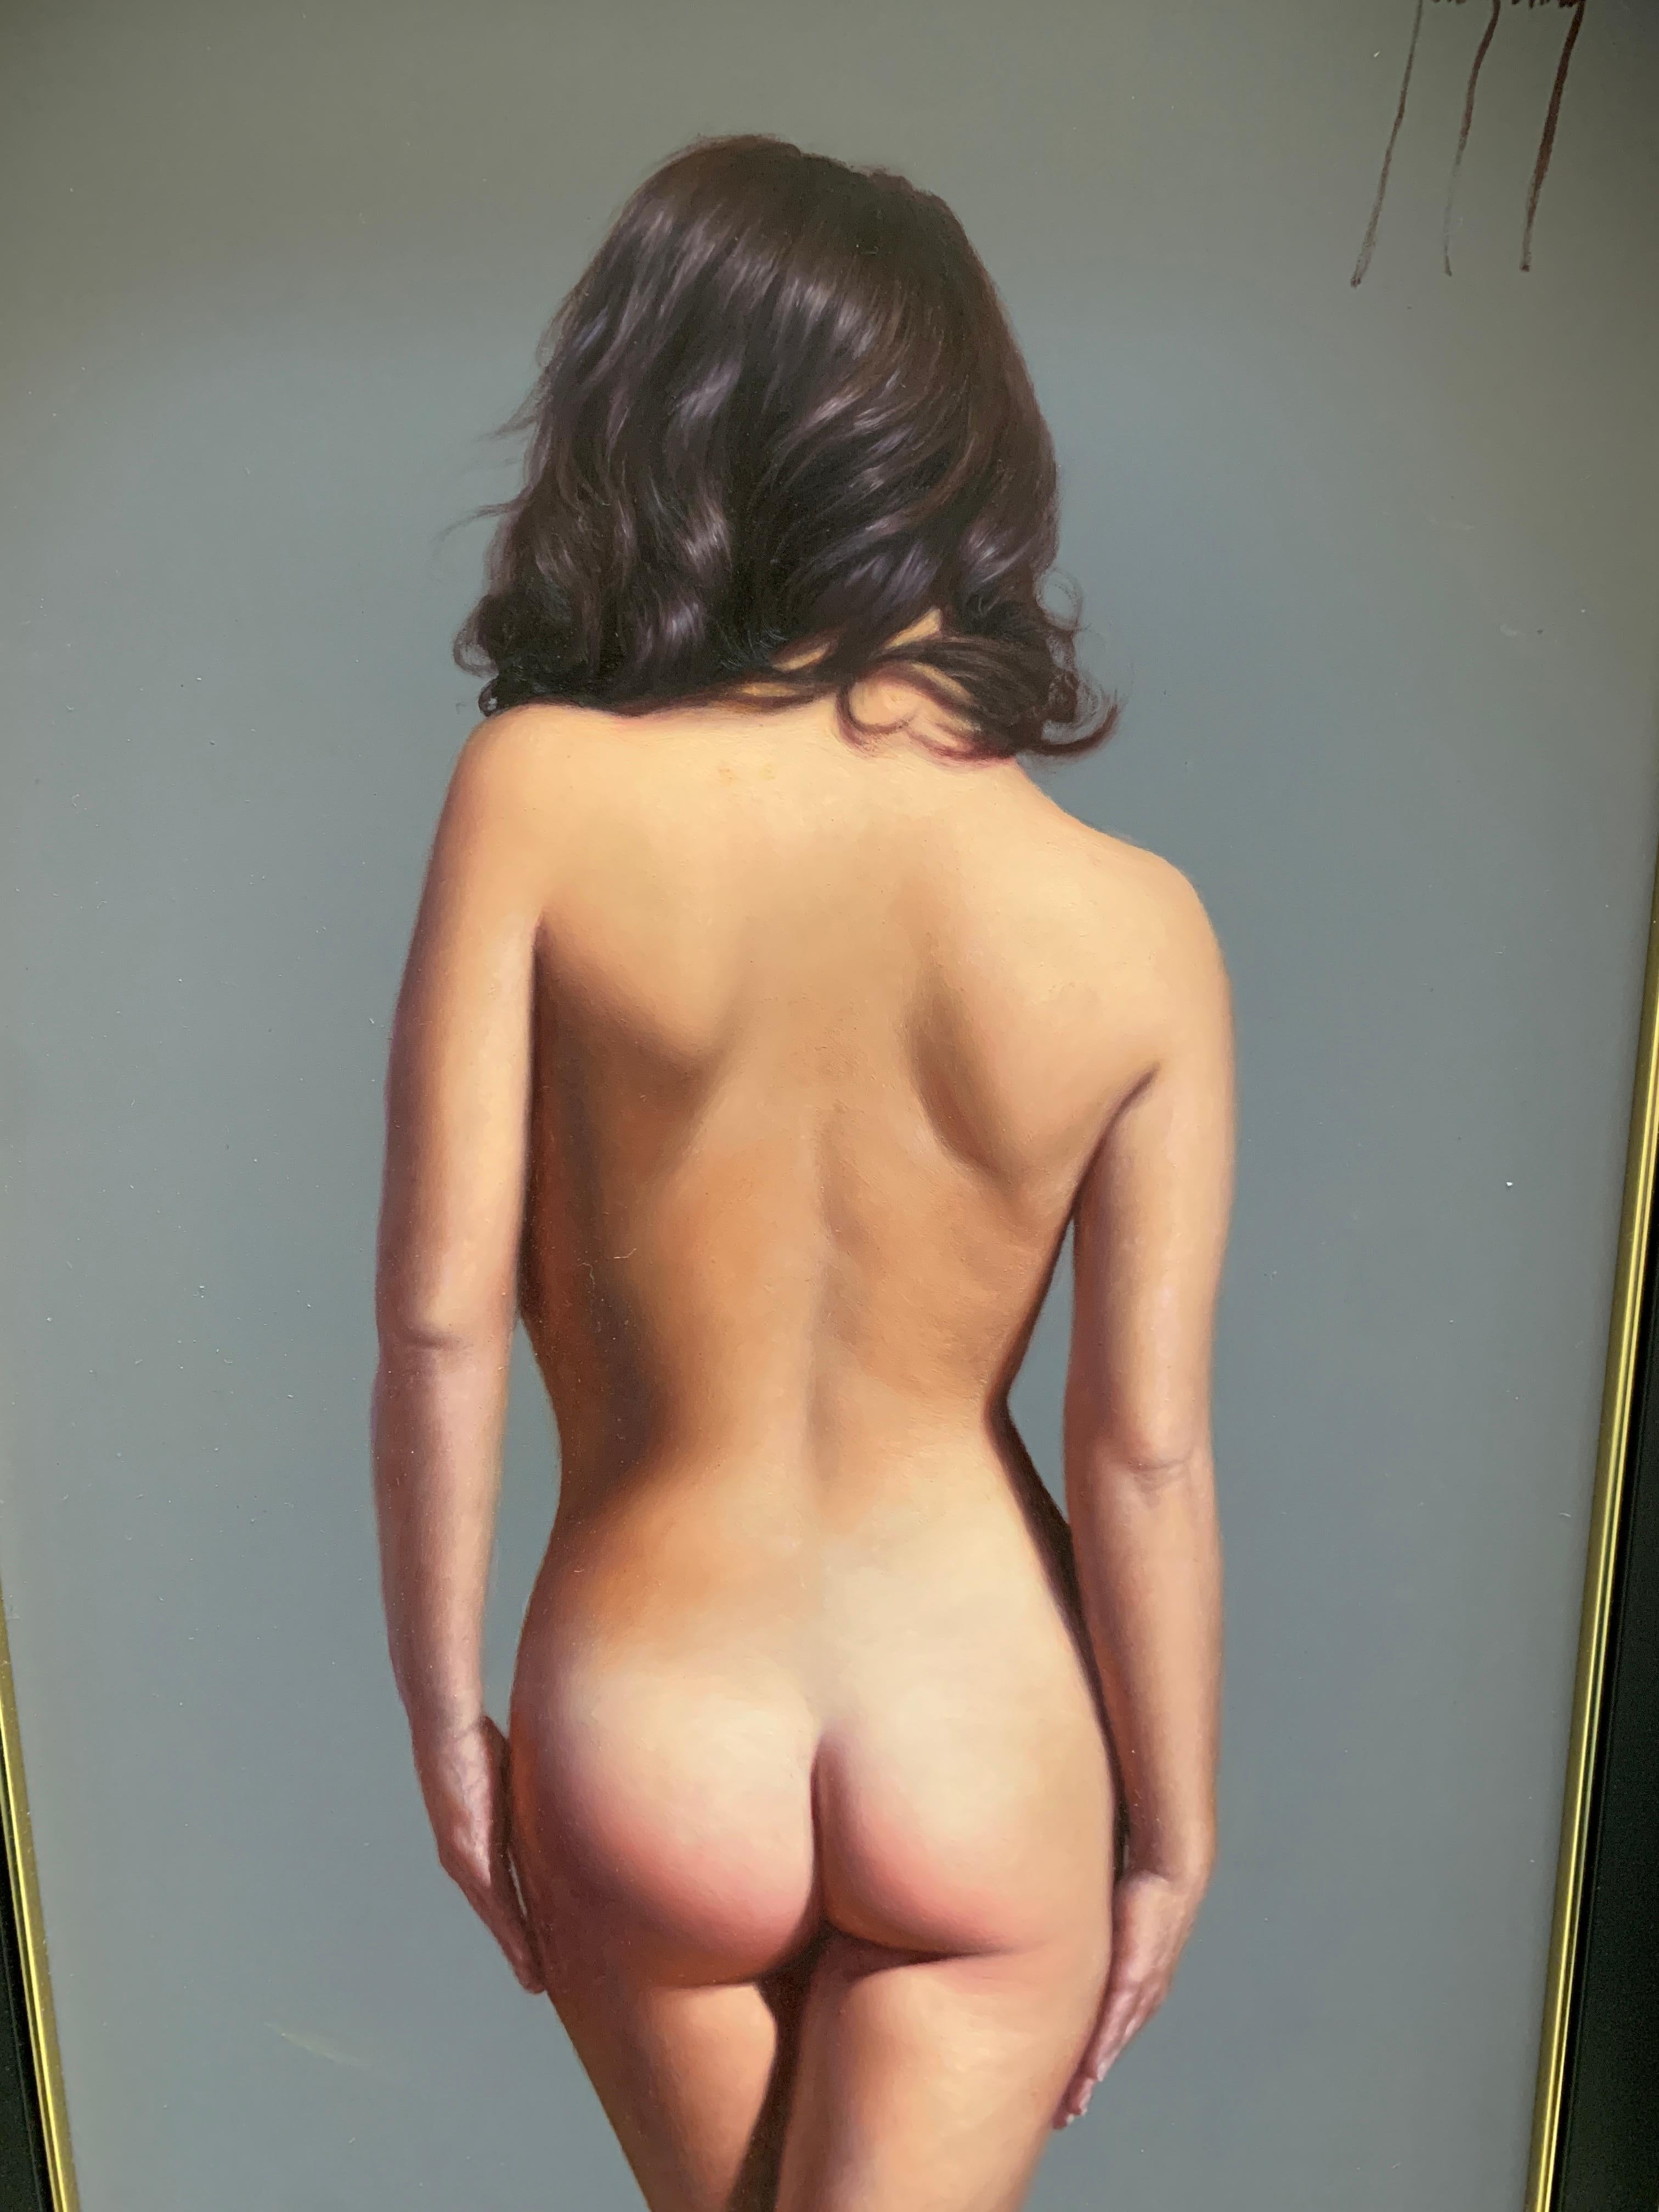 This painting is in excellent condition and has only been shown in a gallery setting.  The board measures 32x14 inches and 35x17 with frame. 
By infusing his works with elements of portraiture, the surreal, and the classical, Jose Borrell redefines